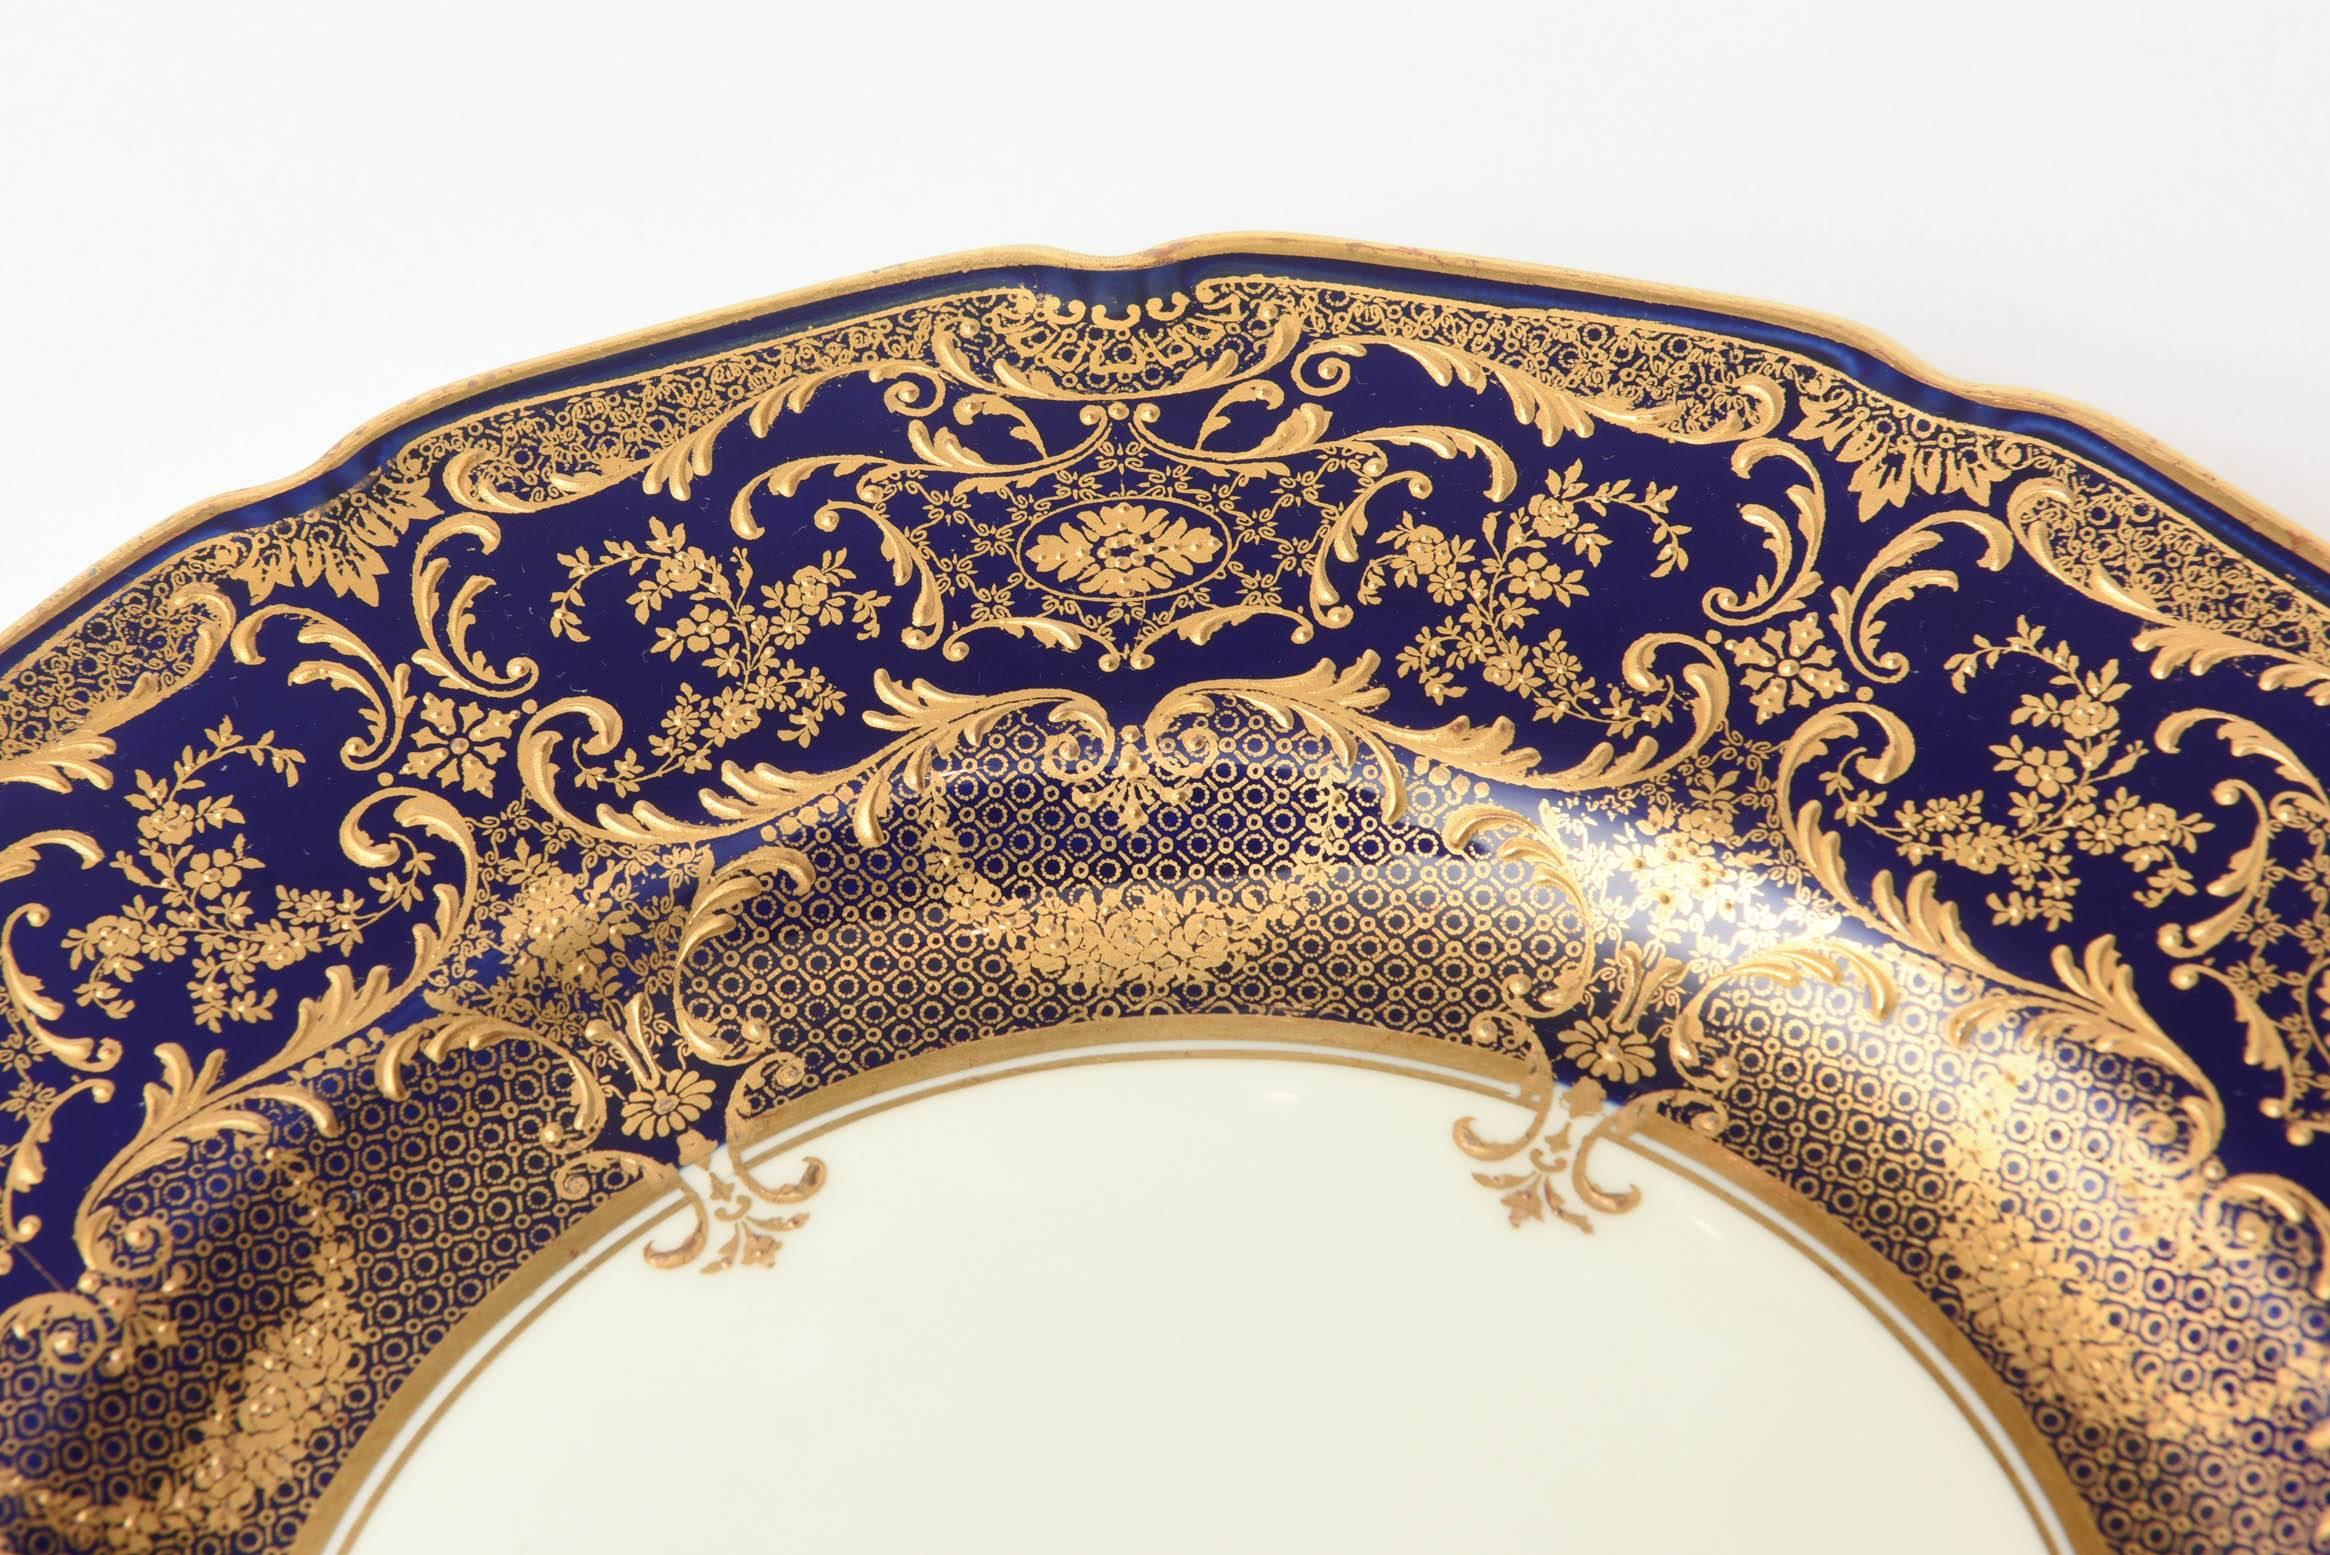 Early 20th Century 12 Exquisite and Elaborate Cobalt Blue and Gilt Dessert or Salad Plates